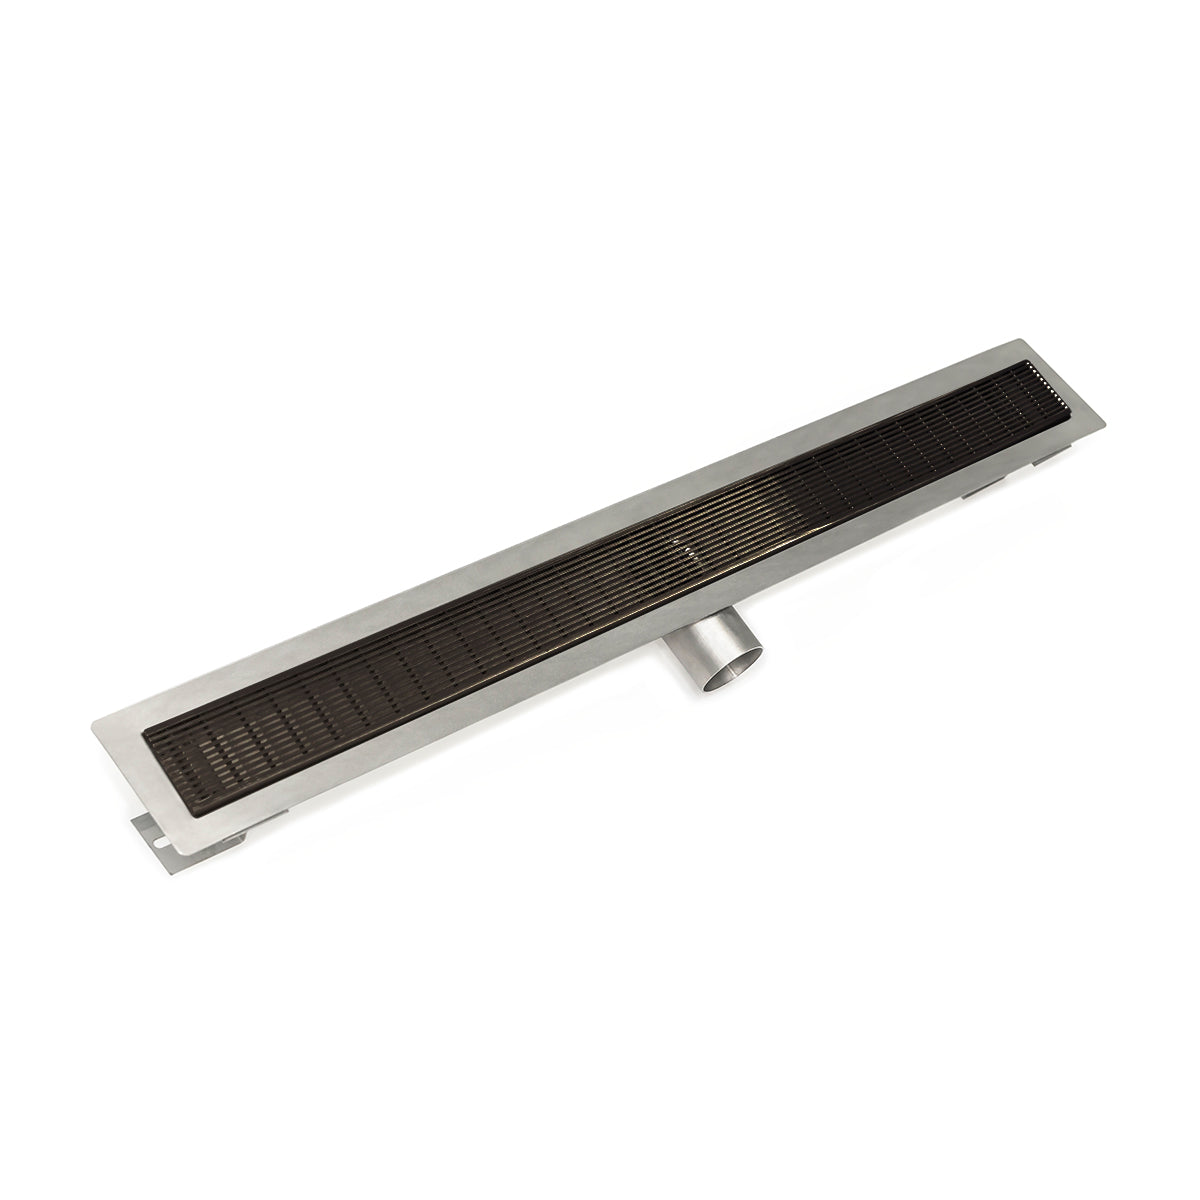 Infinity Drain 48" FT Series Side Outlet Linear Drain Kit with 2 1/2" Wedge Wire Grate